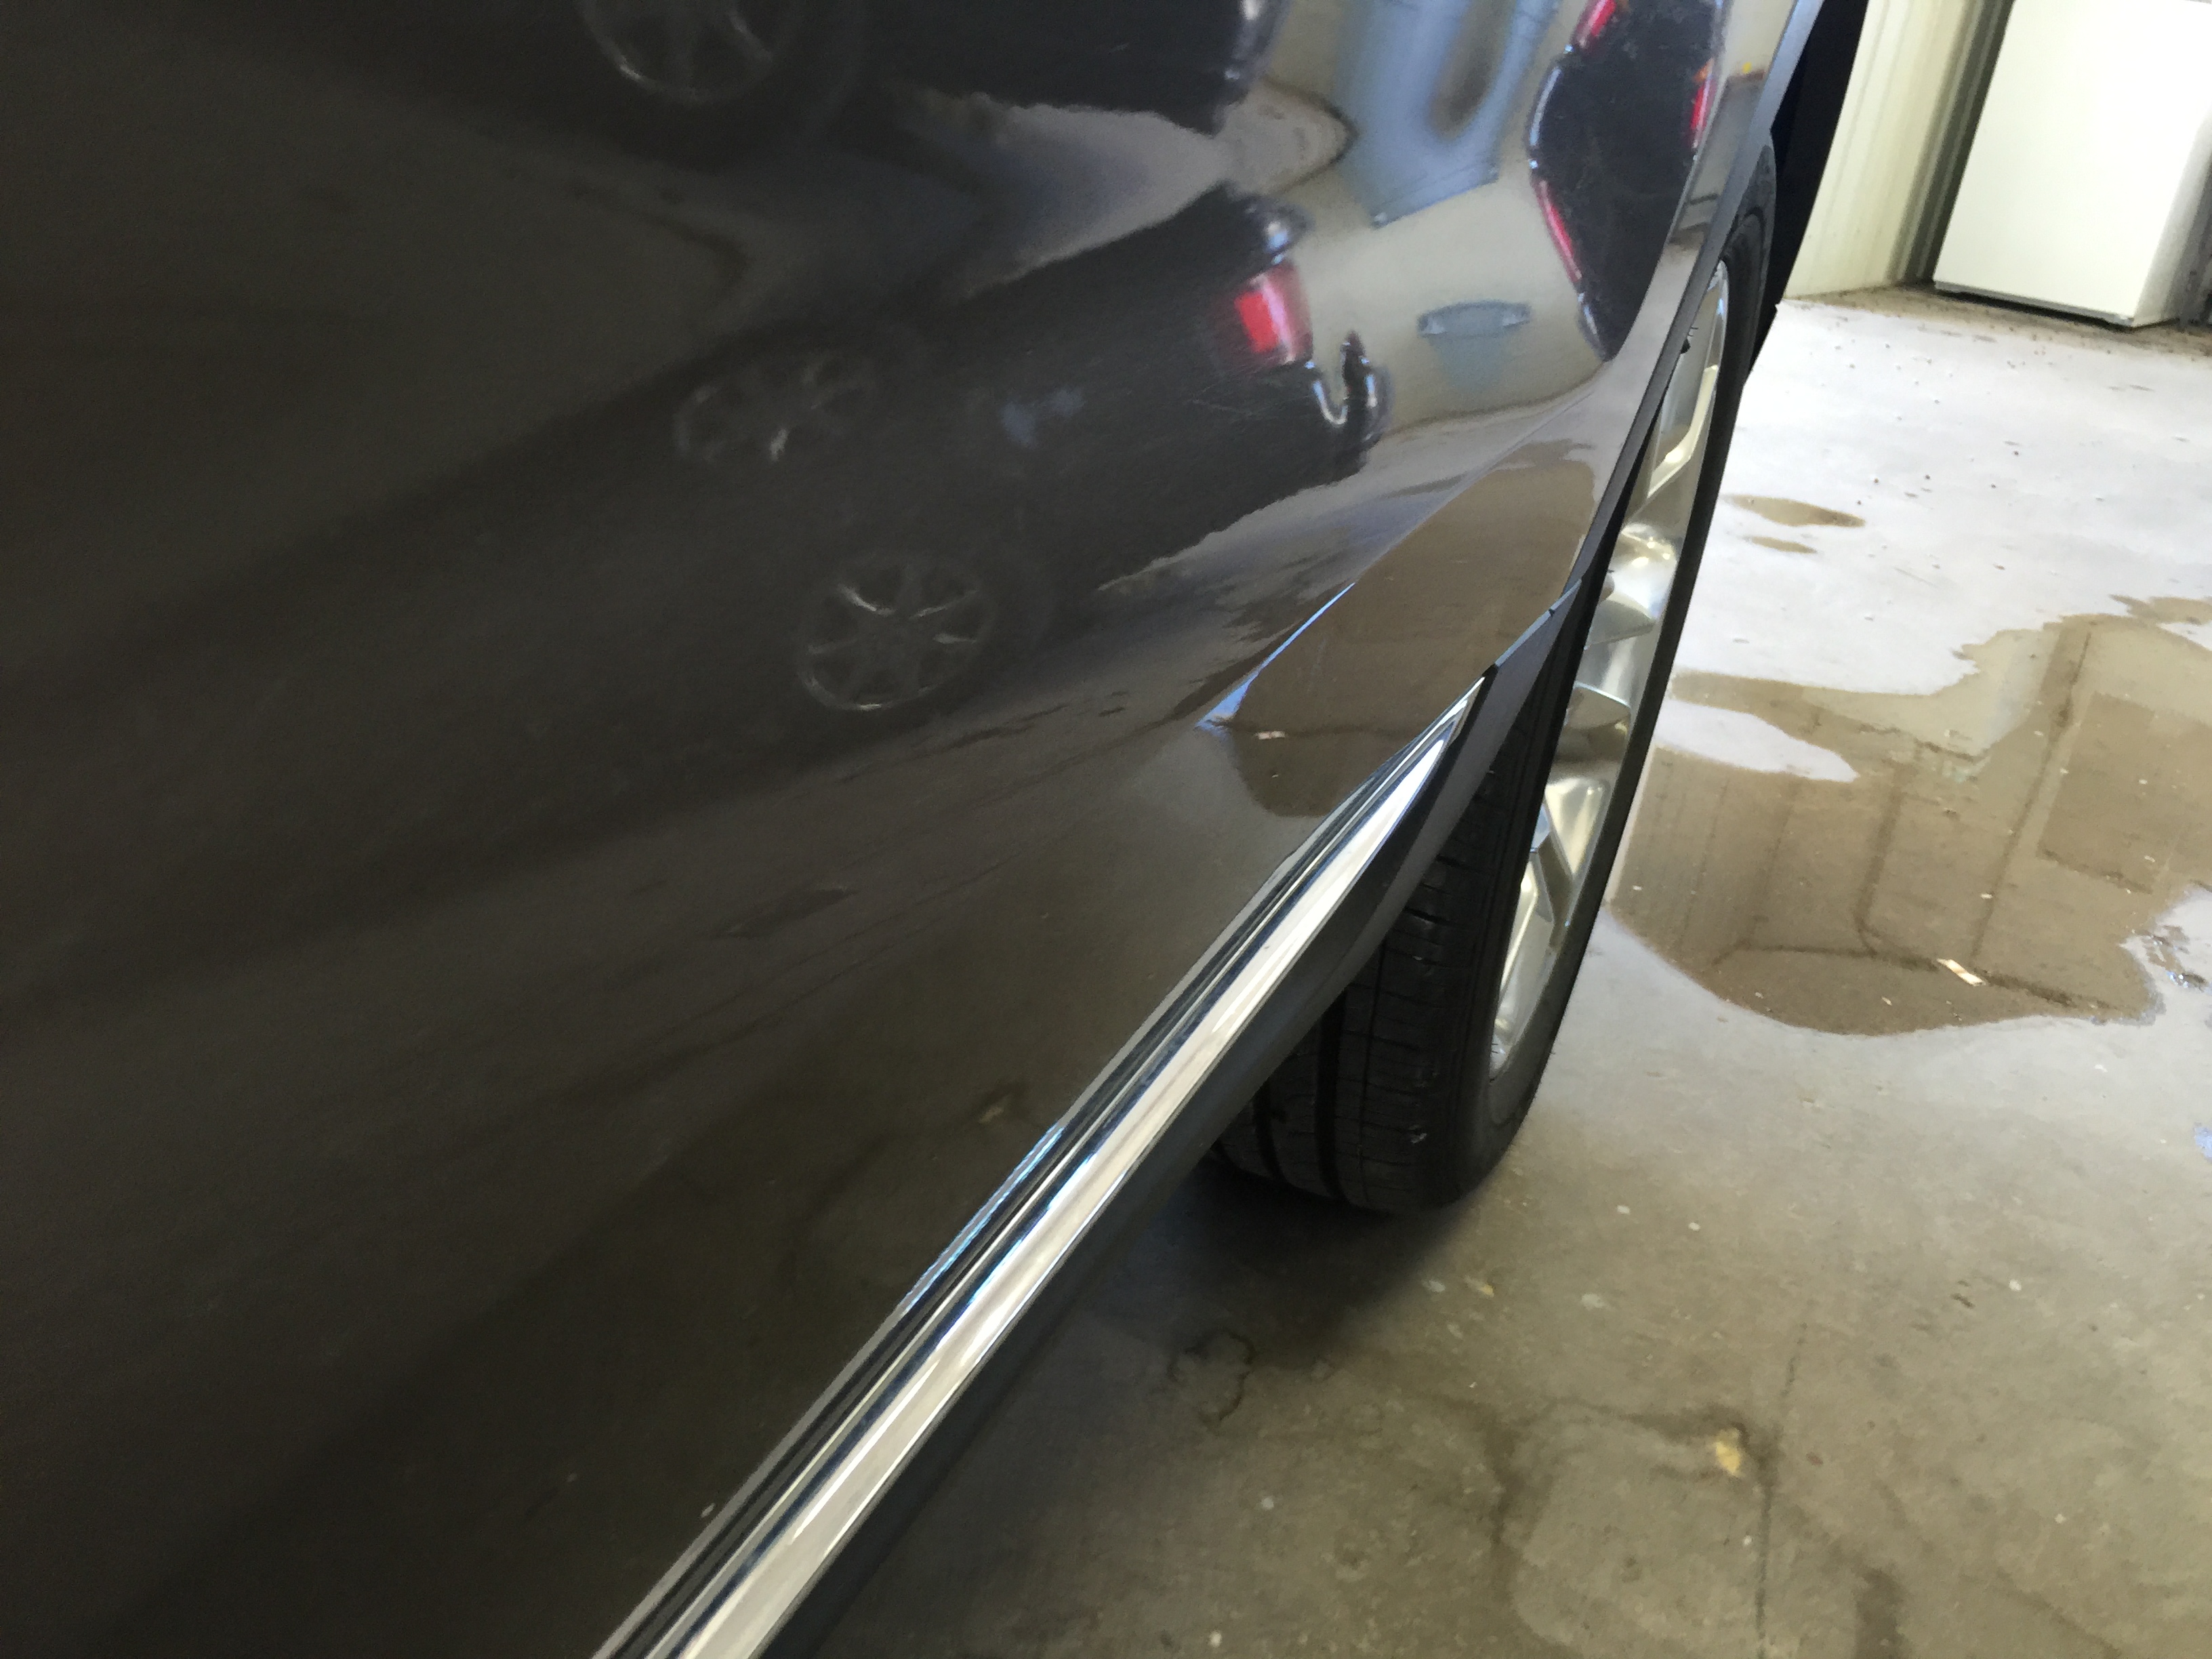 Mobile Dent Repair Springfield IL, 2015 Ford Explorer Drivers Side Rear Door, Dent Removal http://217dent.com